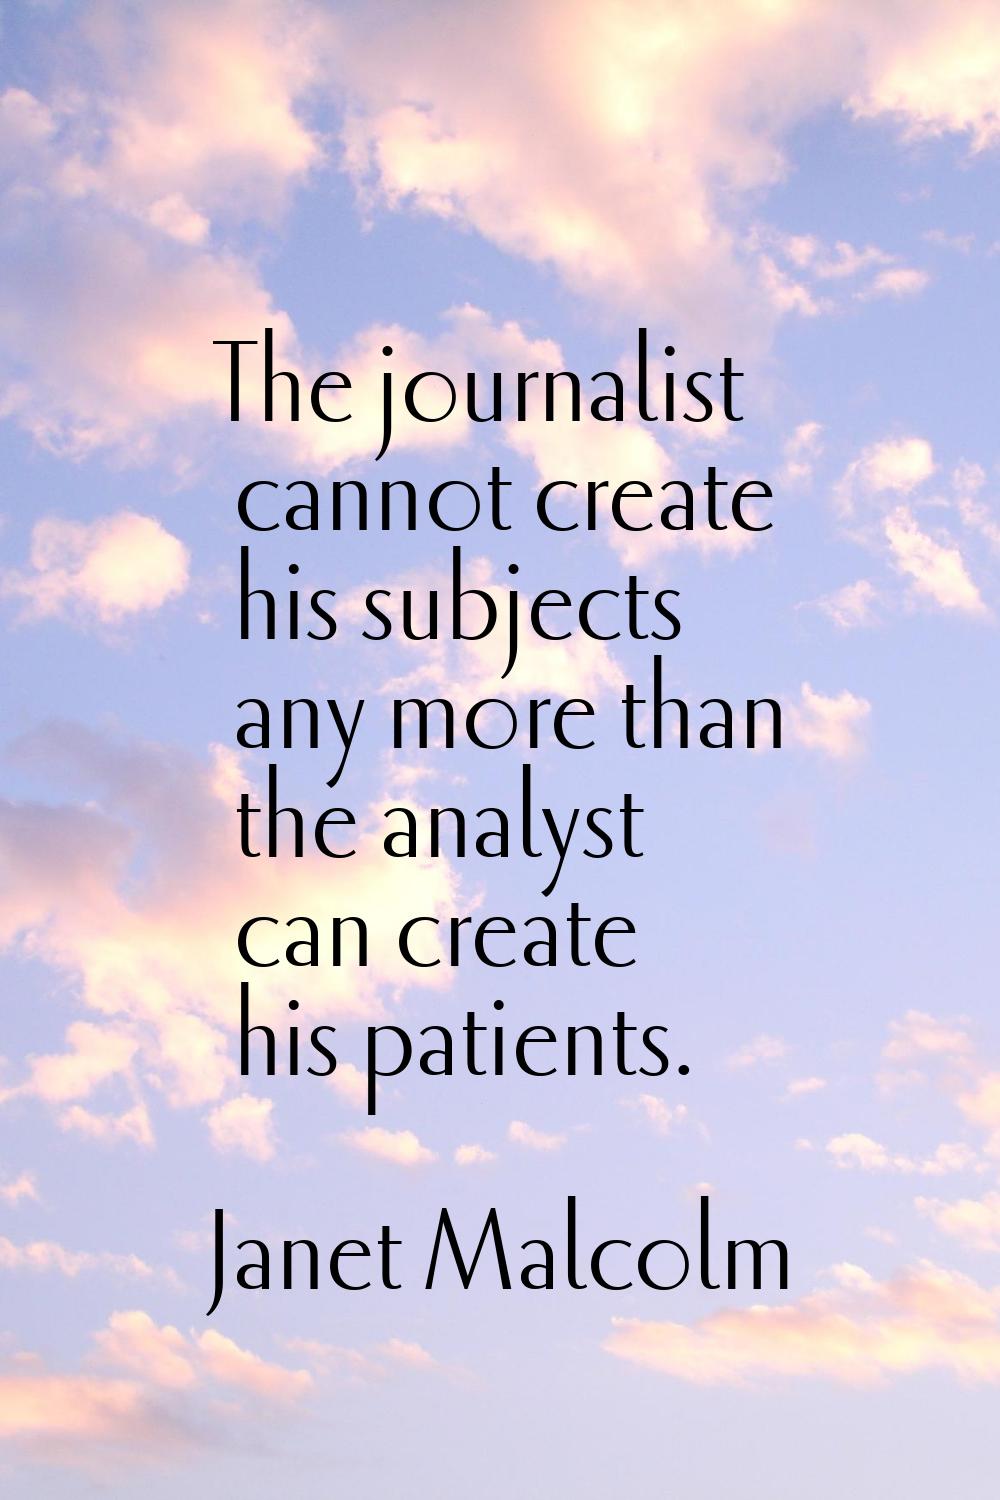 The journalist cannot create his subjects any more than the analyst can create his patients.